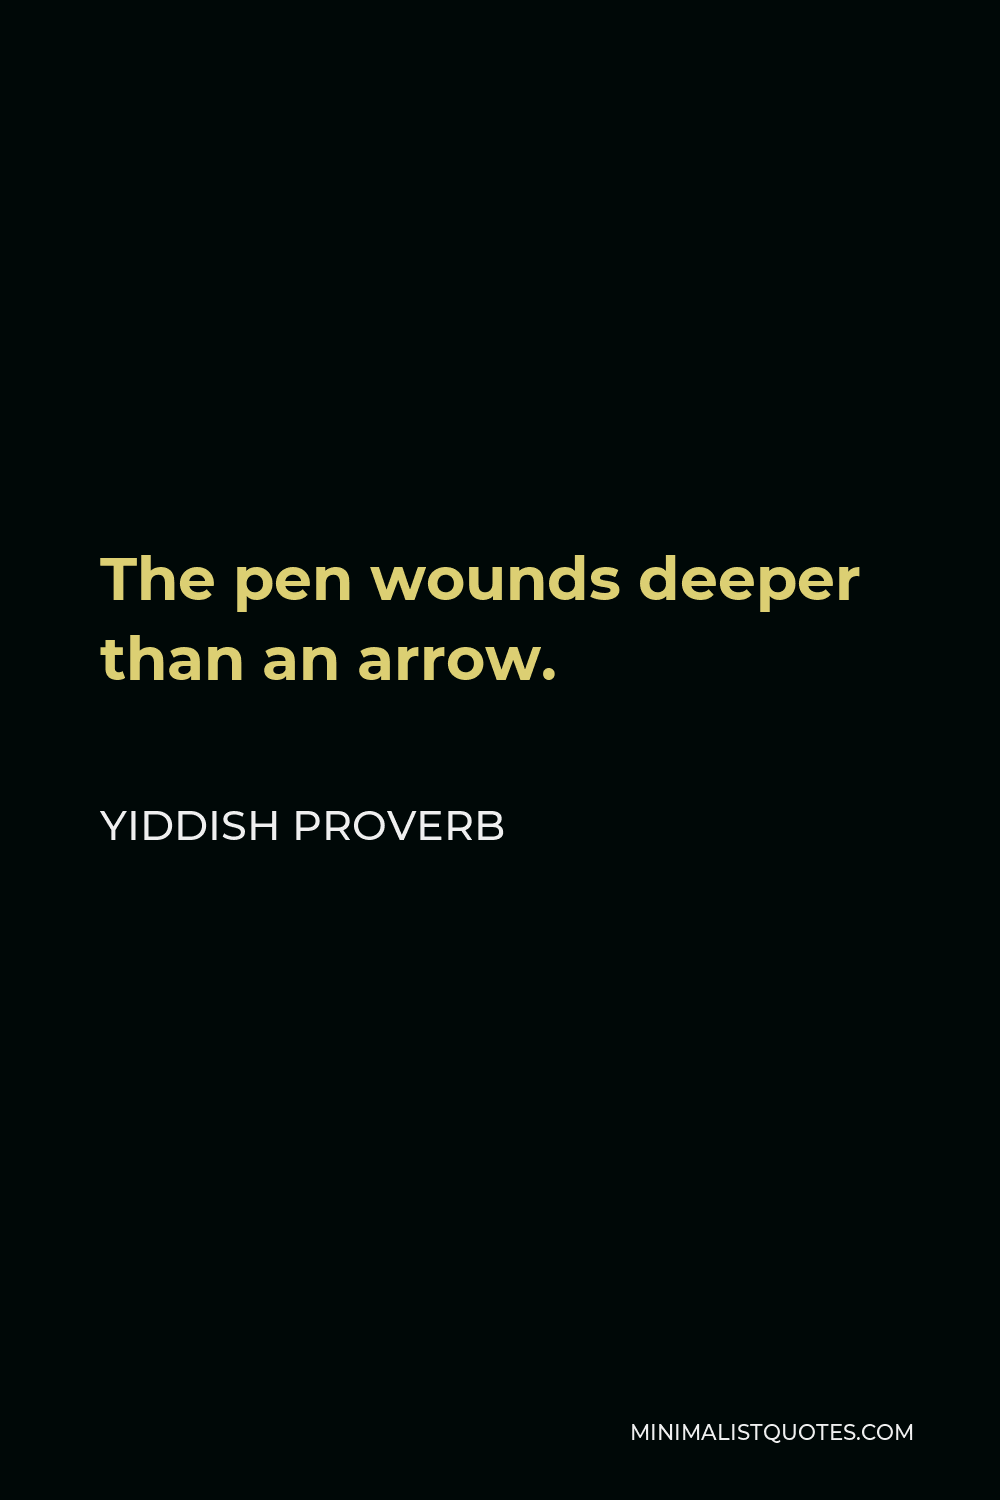 Yiddish Proverb Quote - The pen wounds deeper than an arrow.